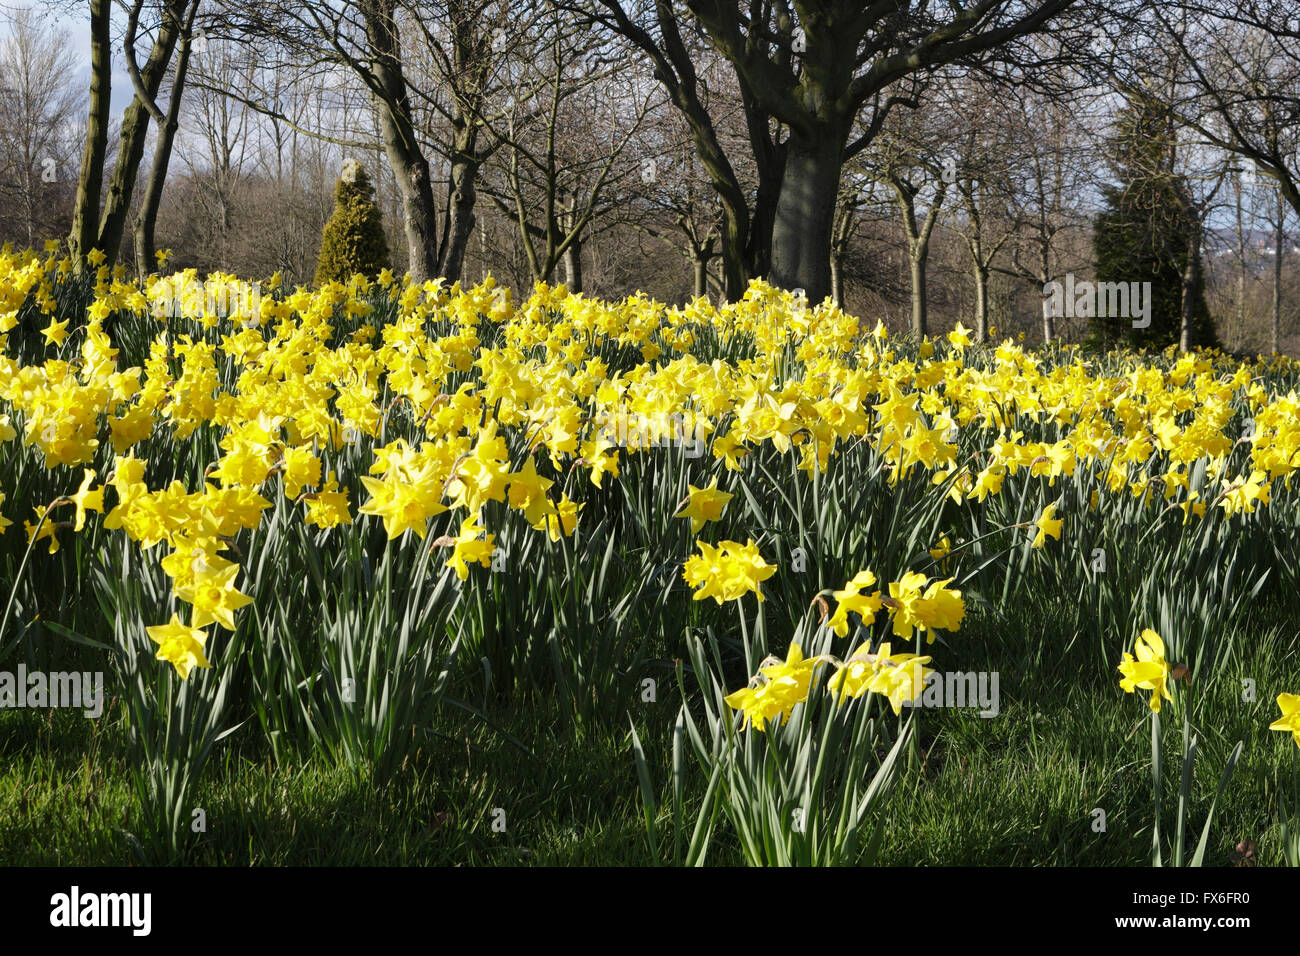 Spring Bloom Yellow Daffodils Flowers Stock Photo